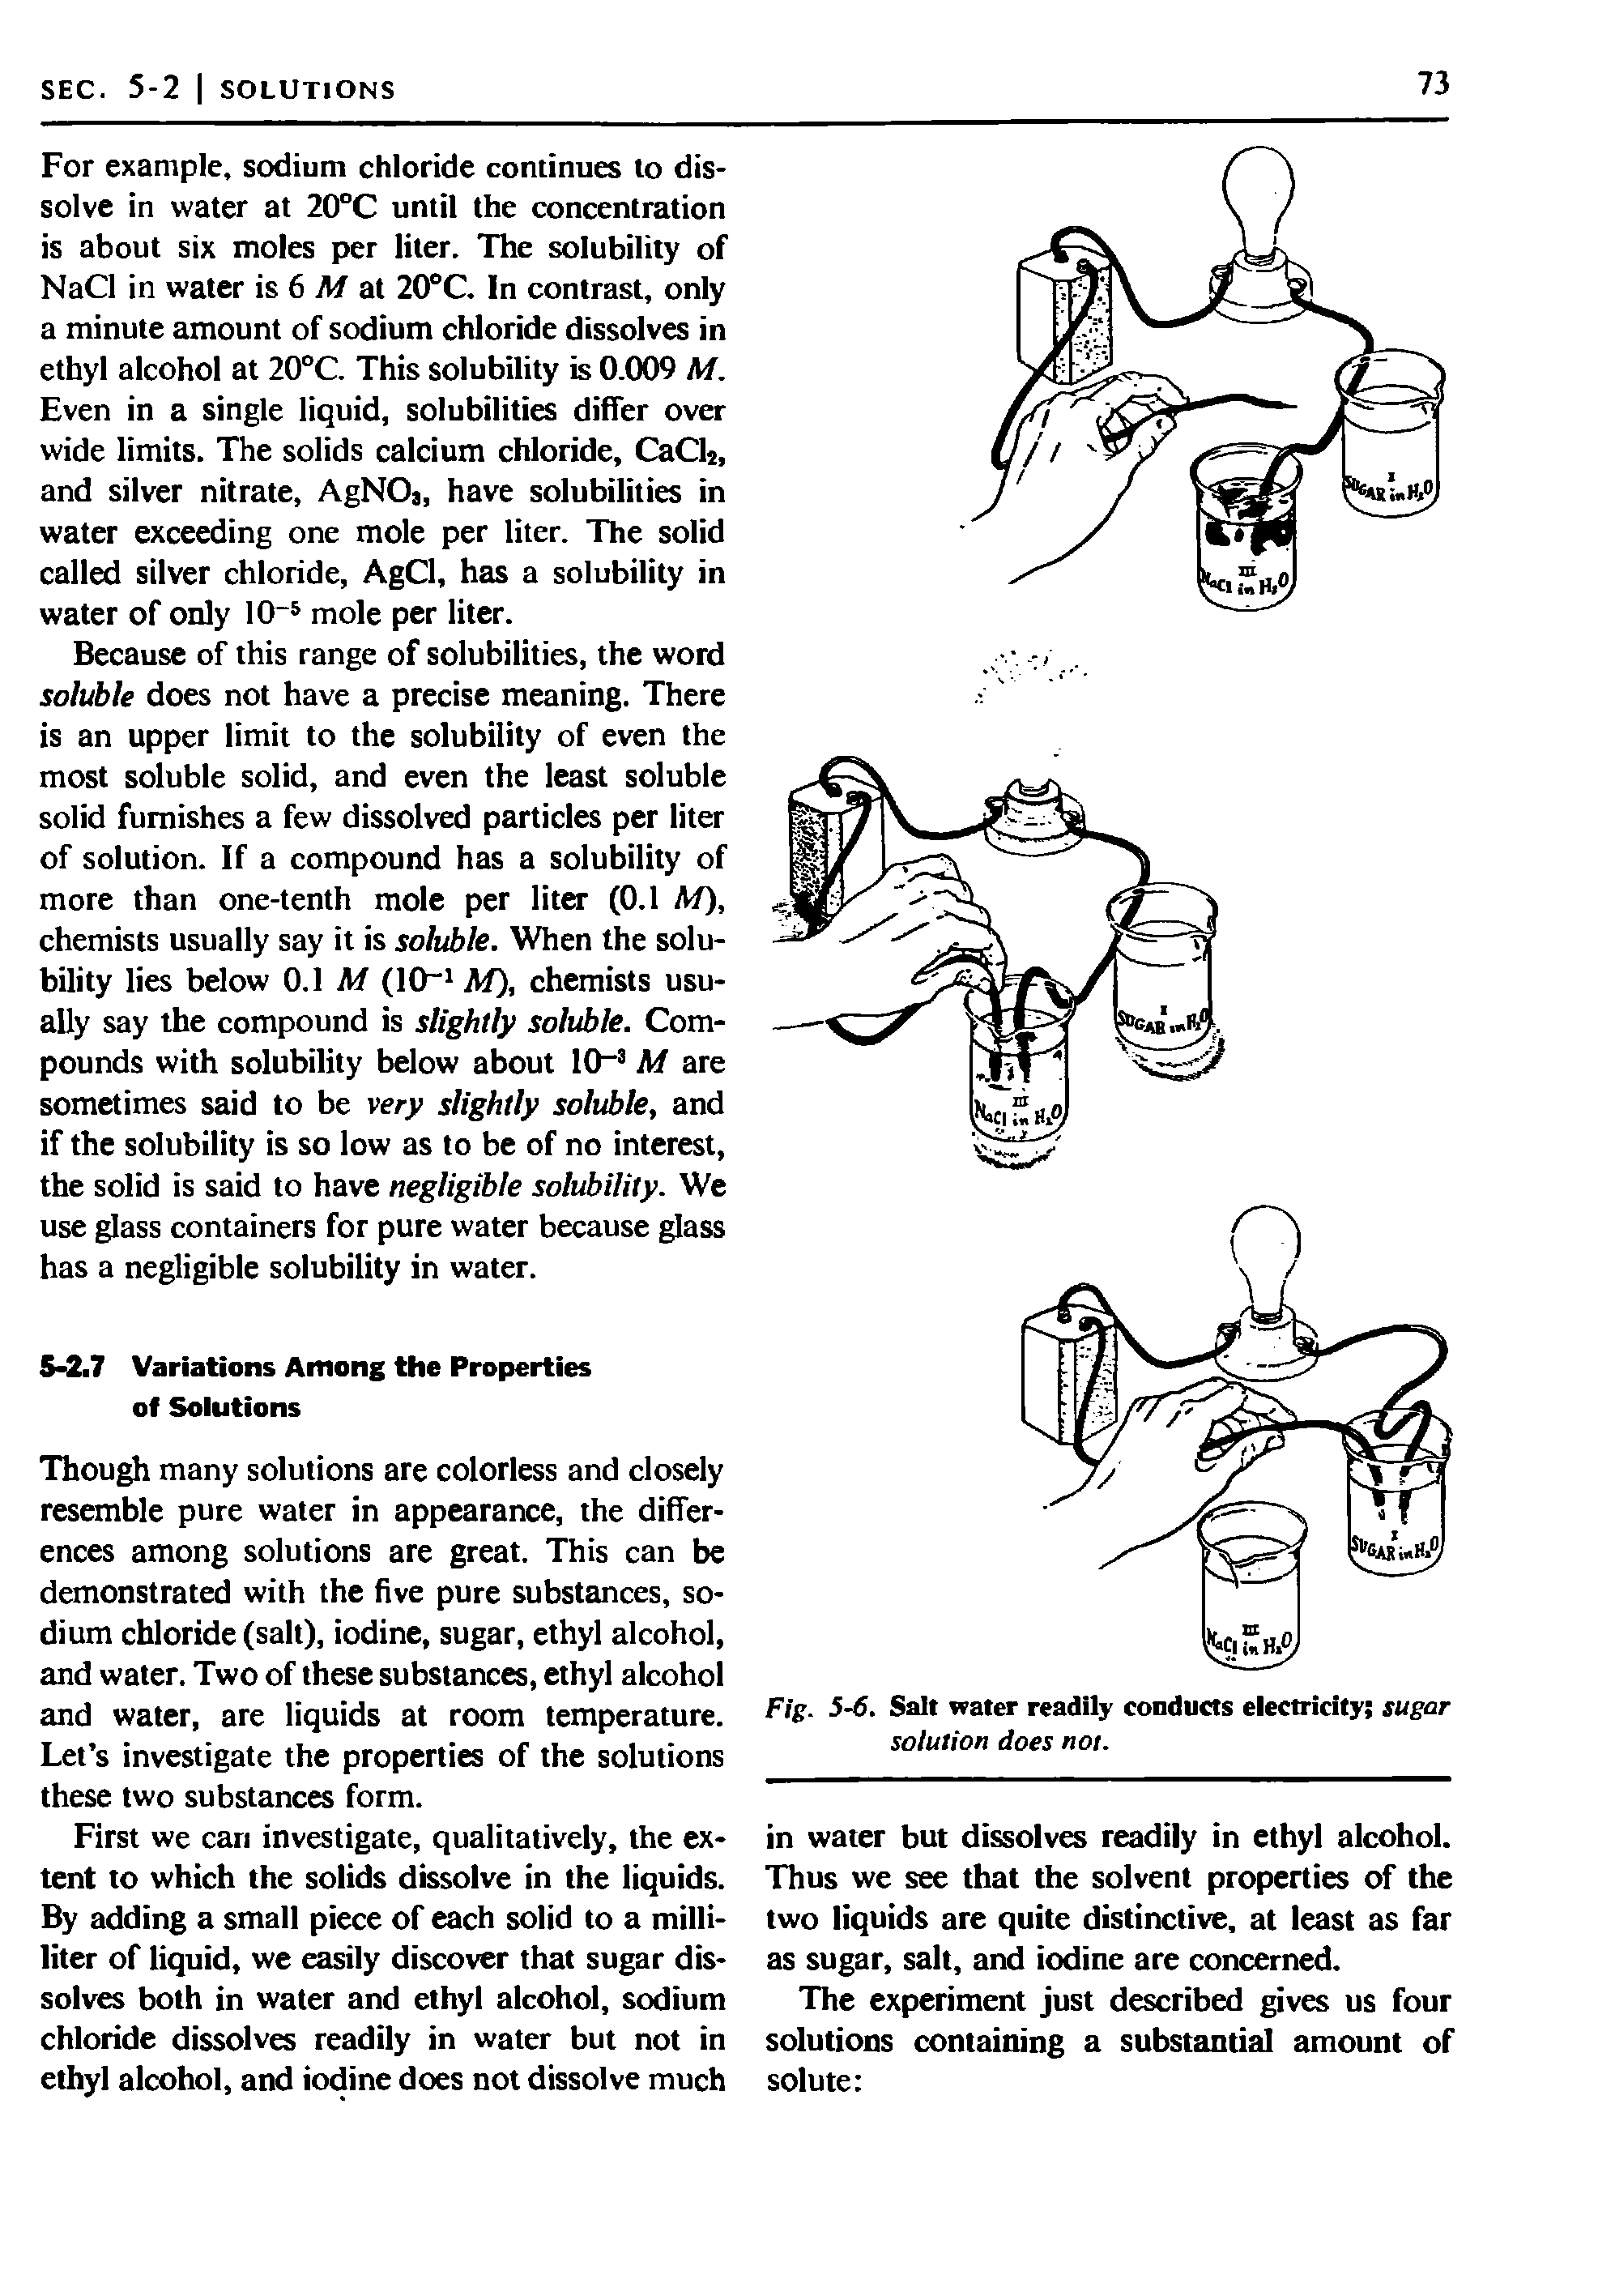 Fig. 5-6. Salt water readily conducts electricity sugar solution does not.